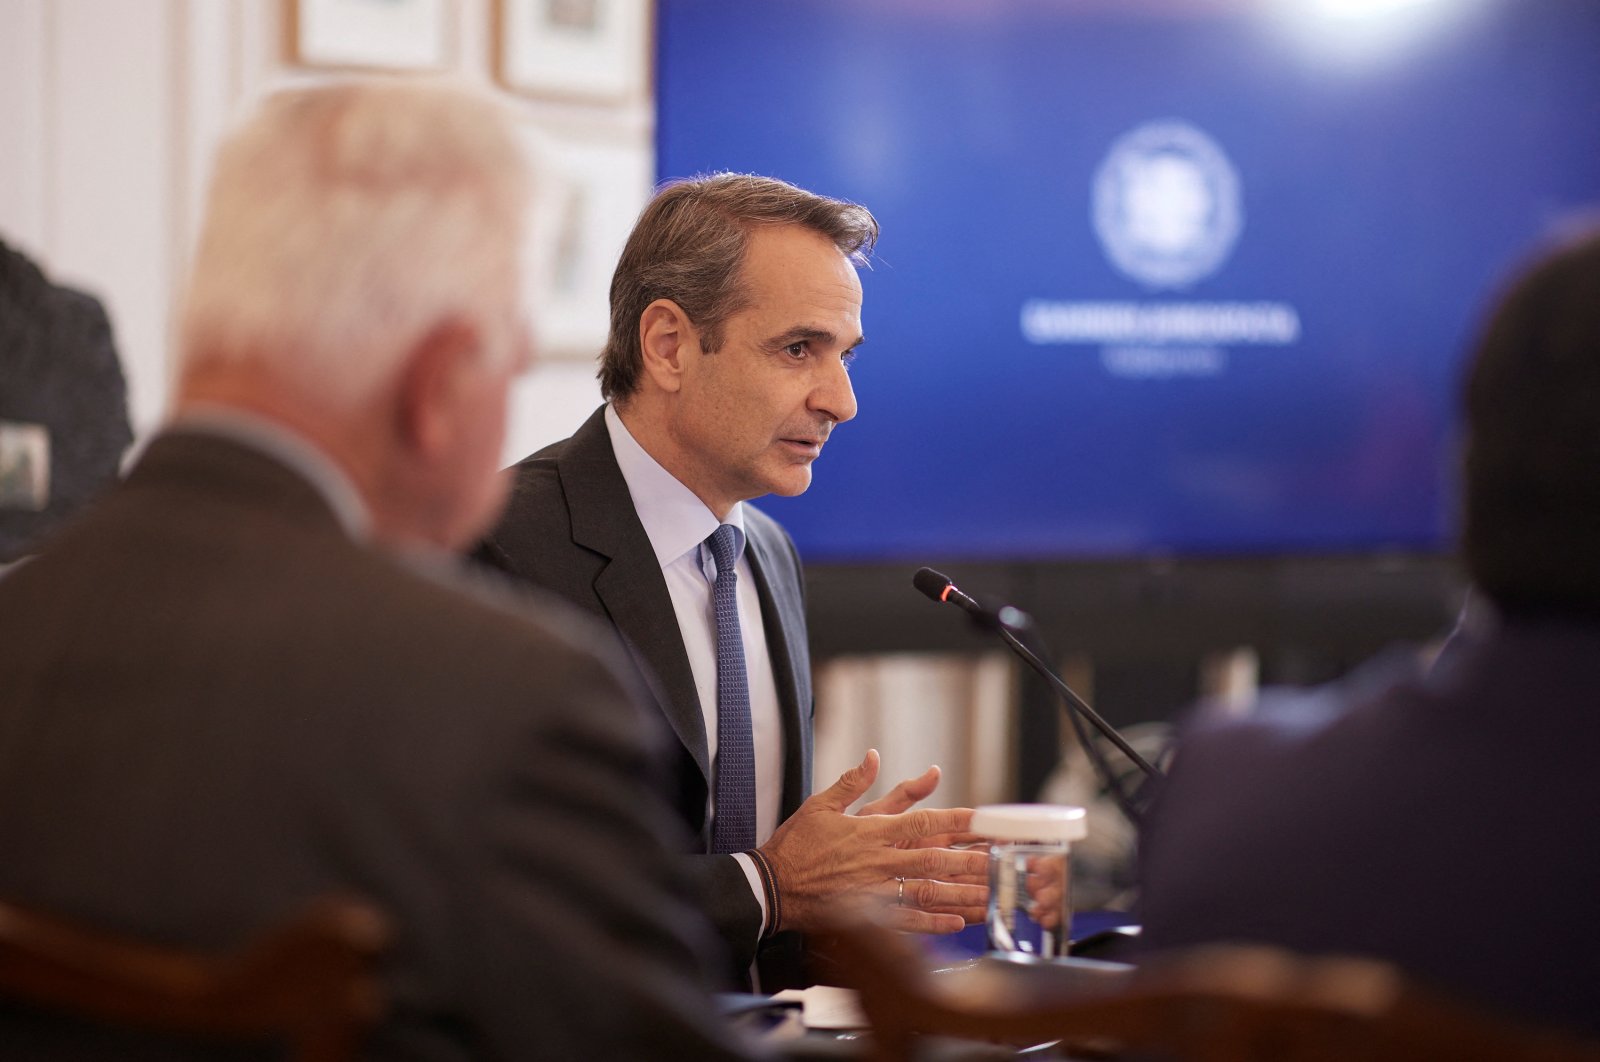 Greek Prime Minister Kyriakos Mitsotakis leads a cabinet meeting in Athens, Greece, March 28, 2023. (Reuters Photo)